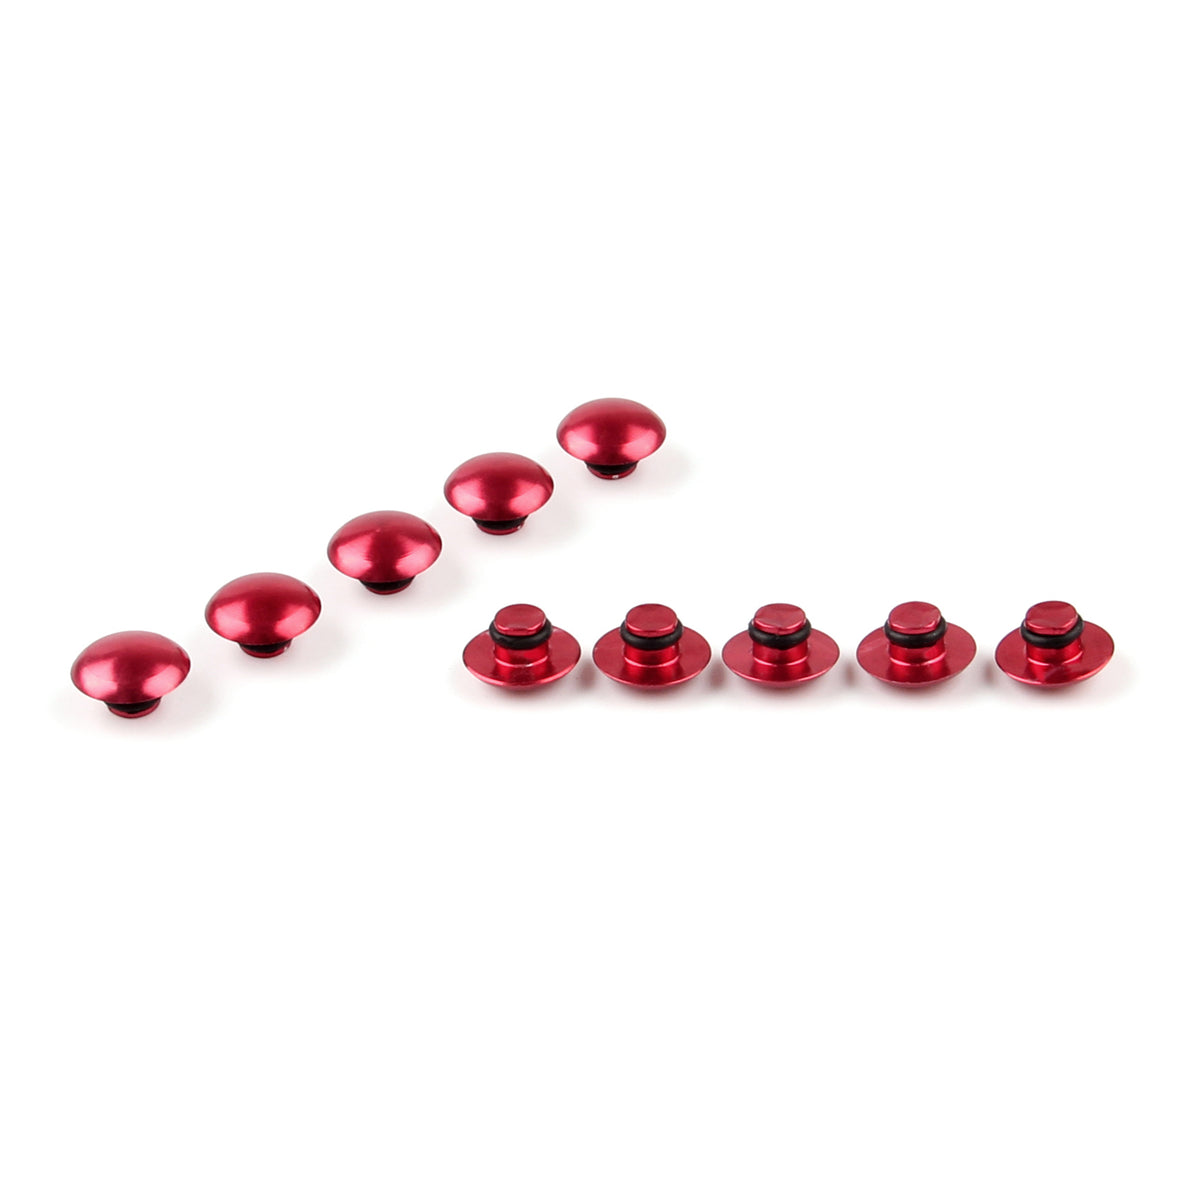 Universal Hex Socket Bolt Screw Nut Head Cover Cap M6 6MM Motorcycle Red Generic